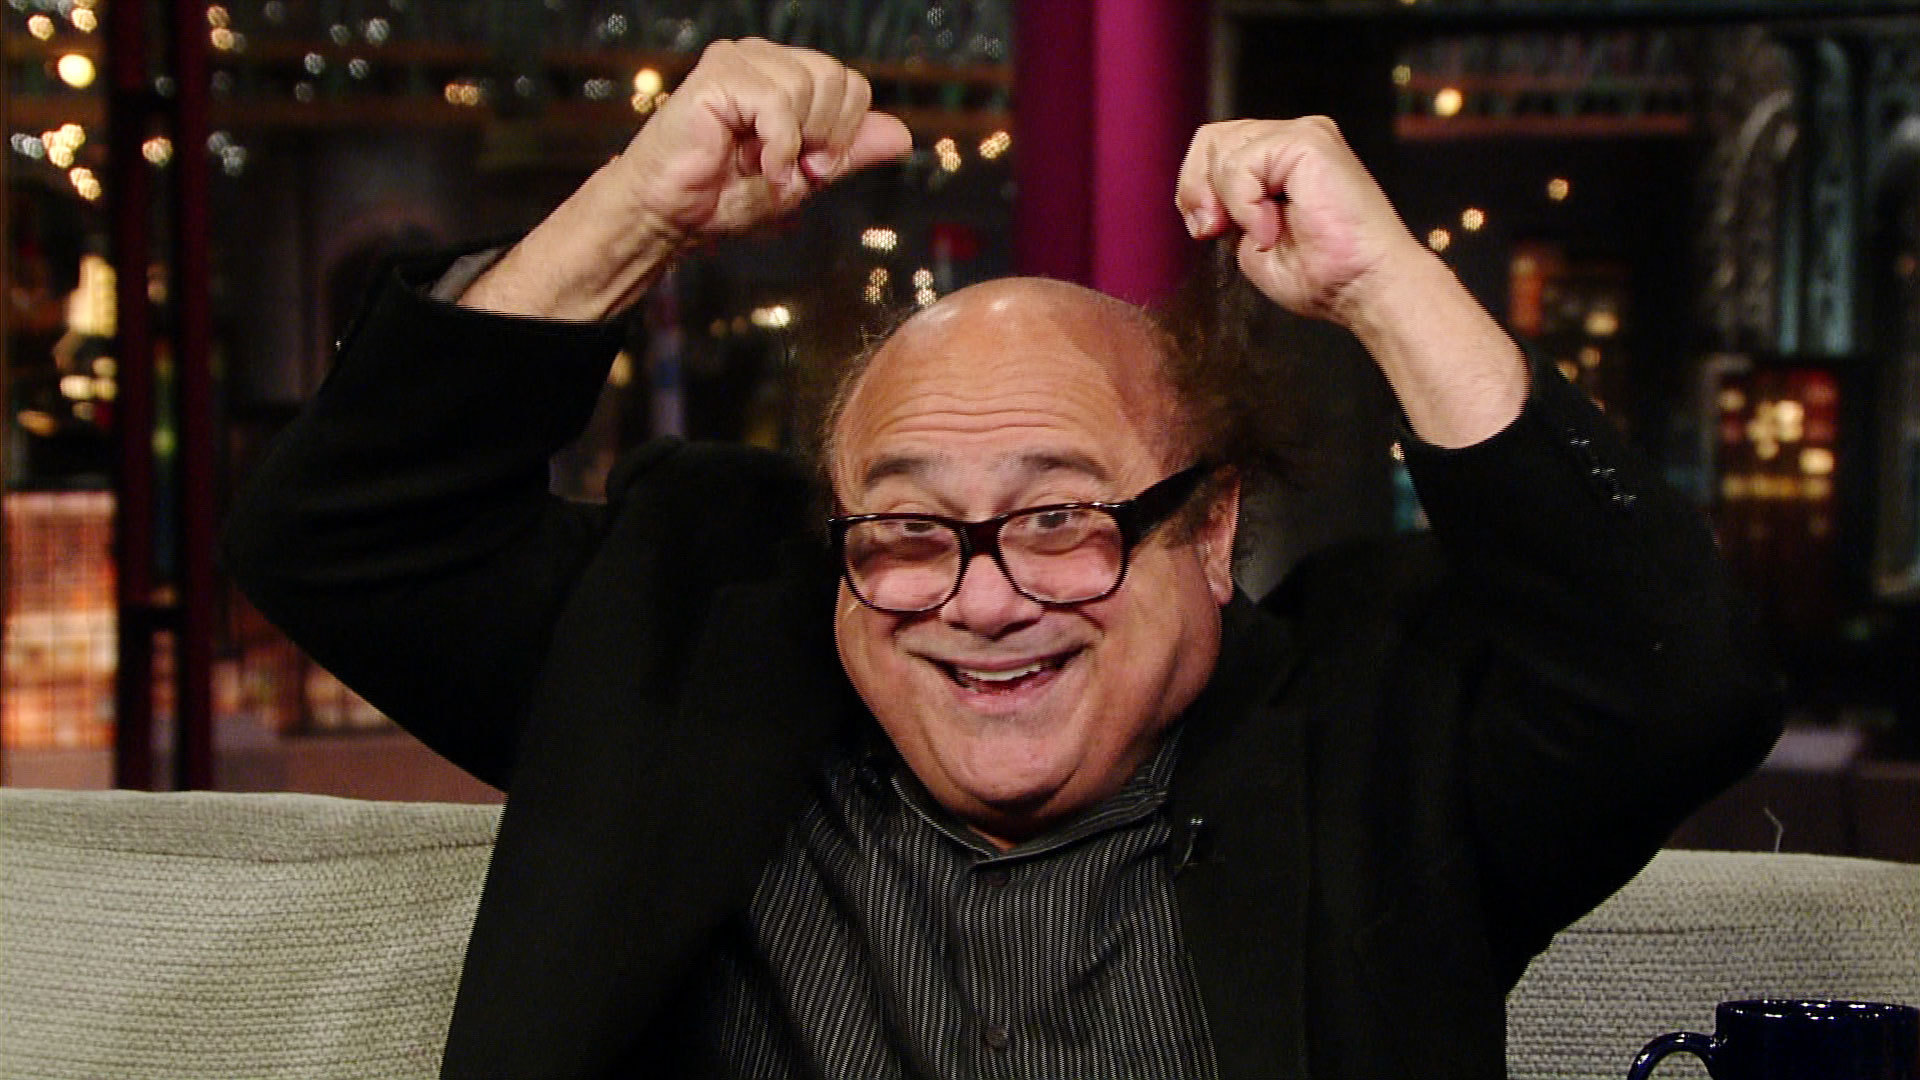 Danny Devito Wallpapers Images Photos Pictures Backgrounds